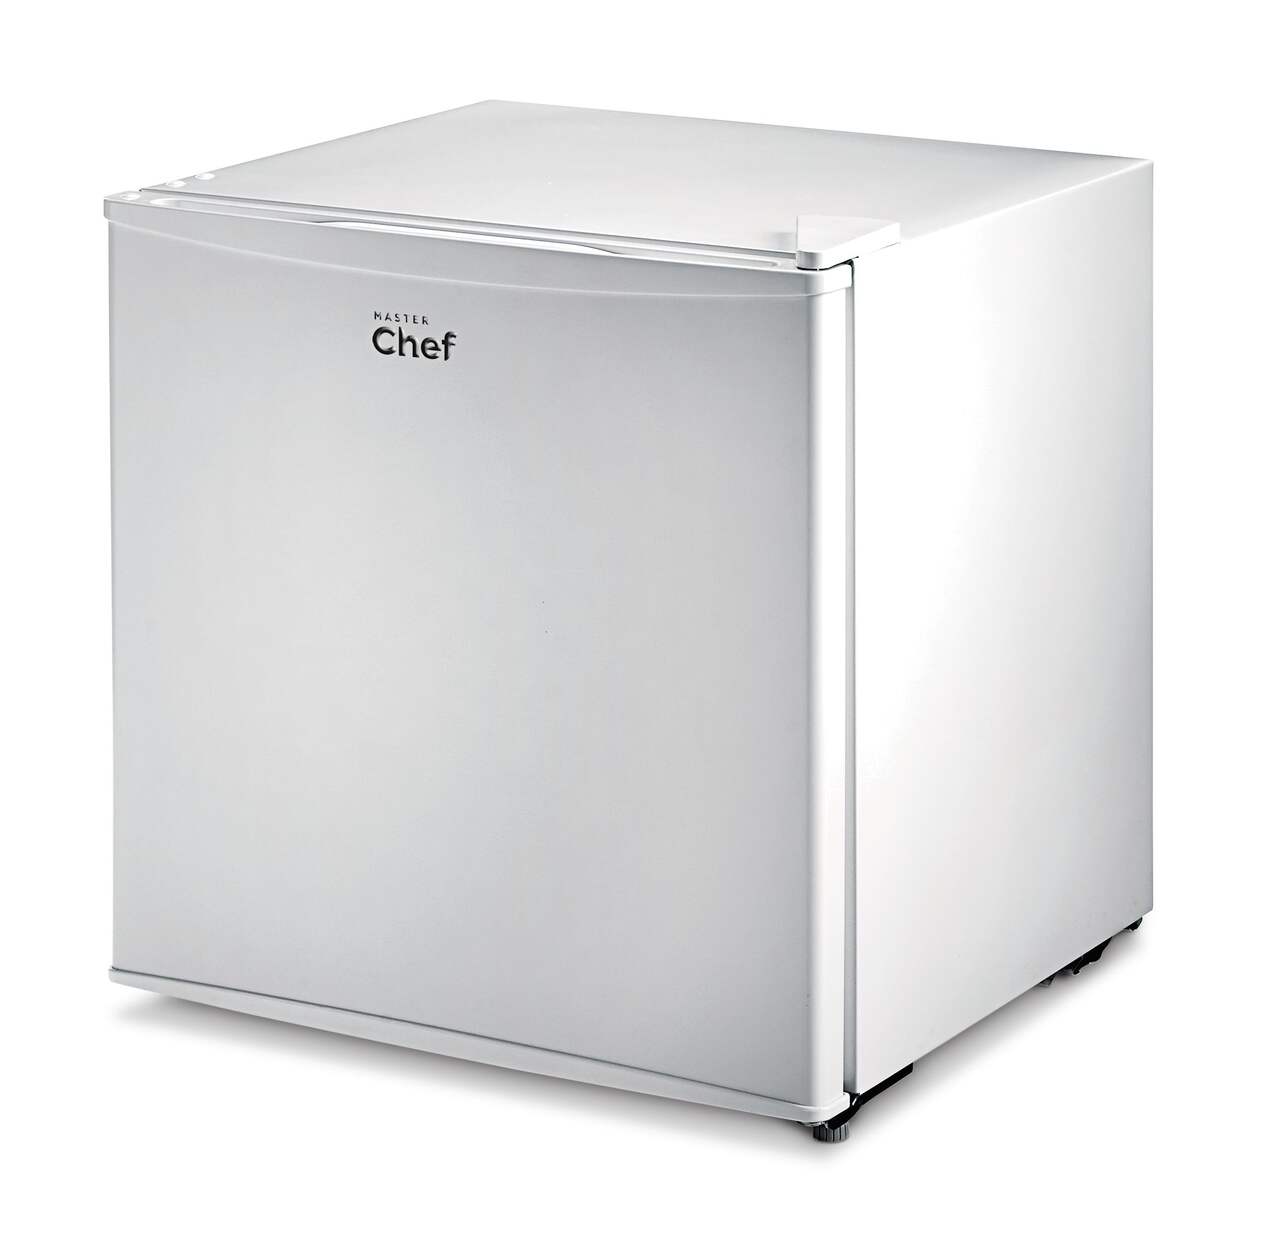 MASTER Chef Energy Star Compact Mini Bar Refrigerator Easy-To-Use  Temperature Control for Dorms/Bedroom, 1.6-cu.ft., White